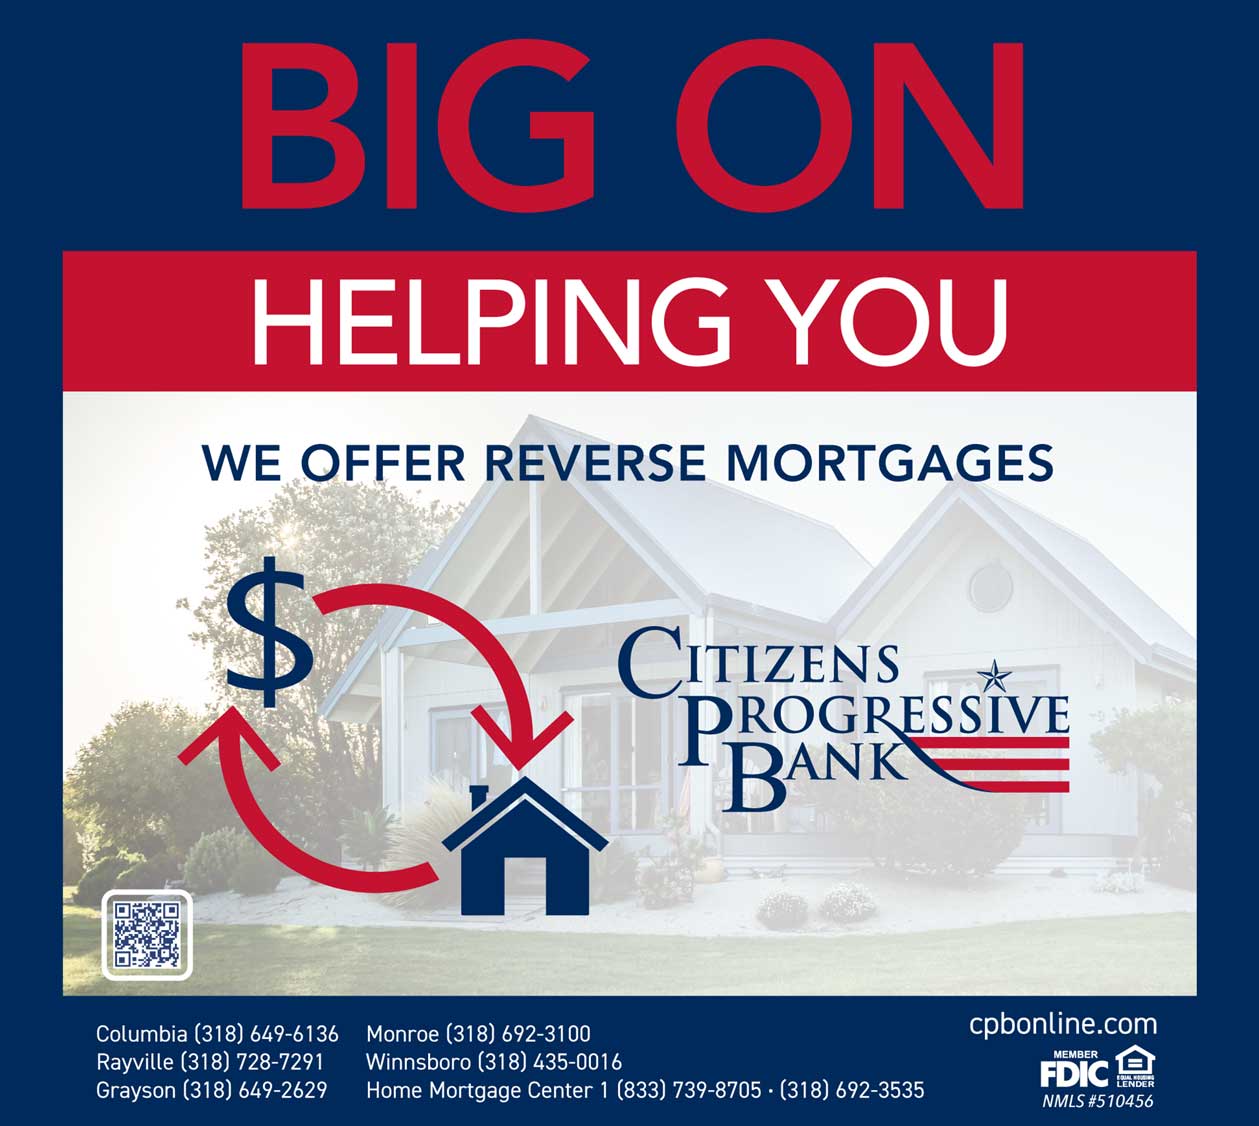 We offer reverse mortgages.